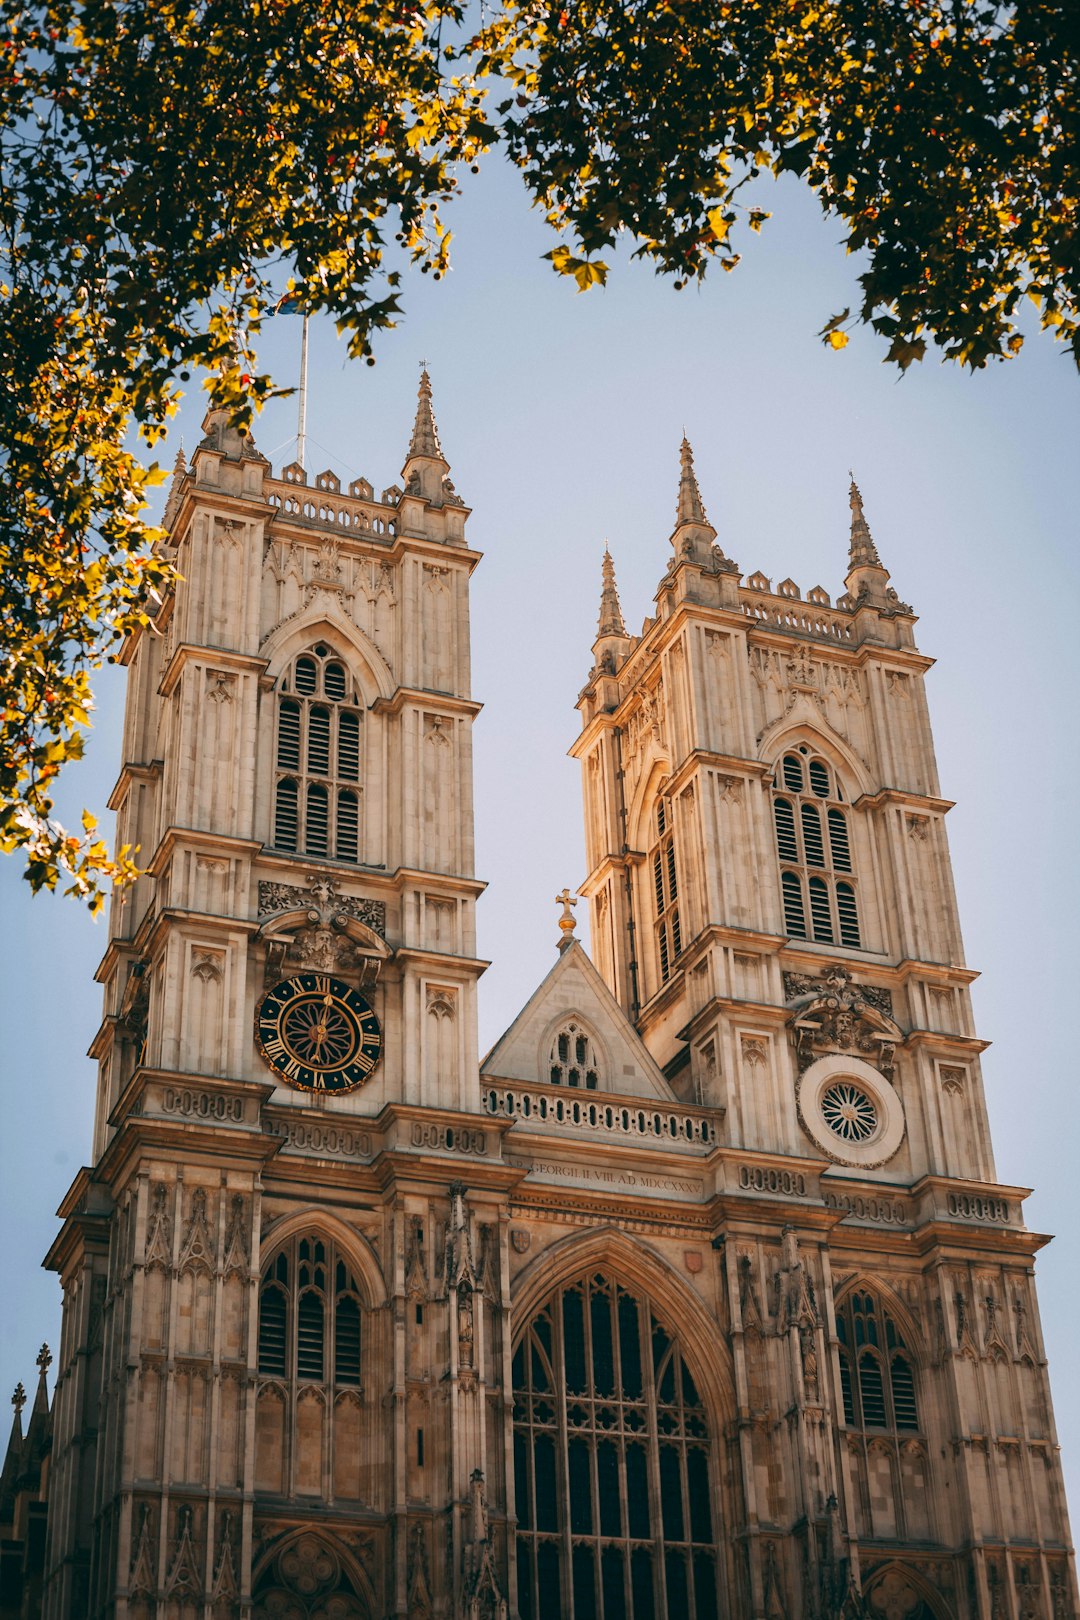 Luckily, during my trip in London, the weather was just amazin. No clouds, pure sun, something you don’t see everyday!
And I believe this photography is one of my best during this trip because of the light, weather and of course subject. The Westminster Abbey